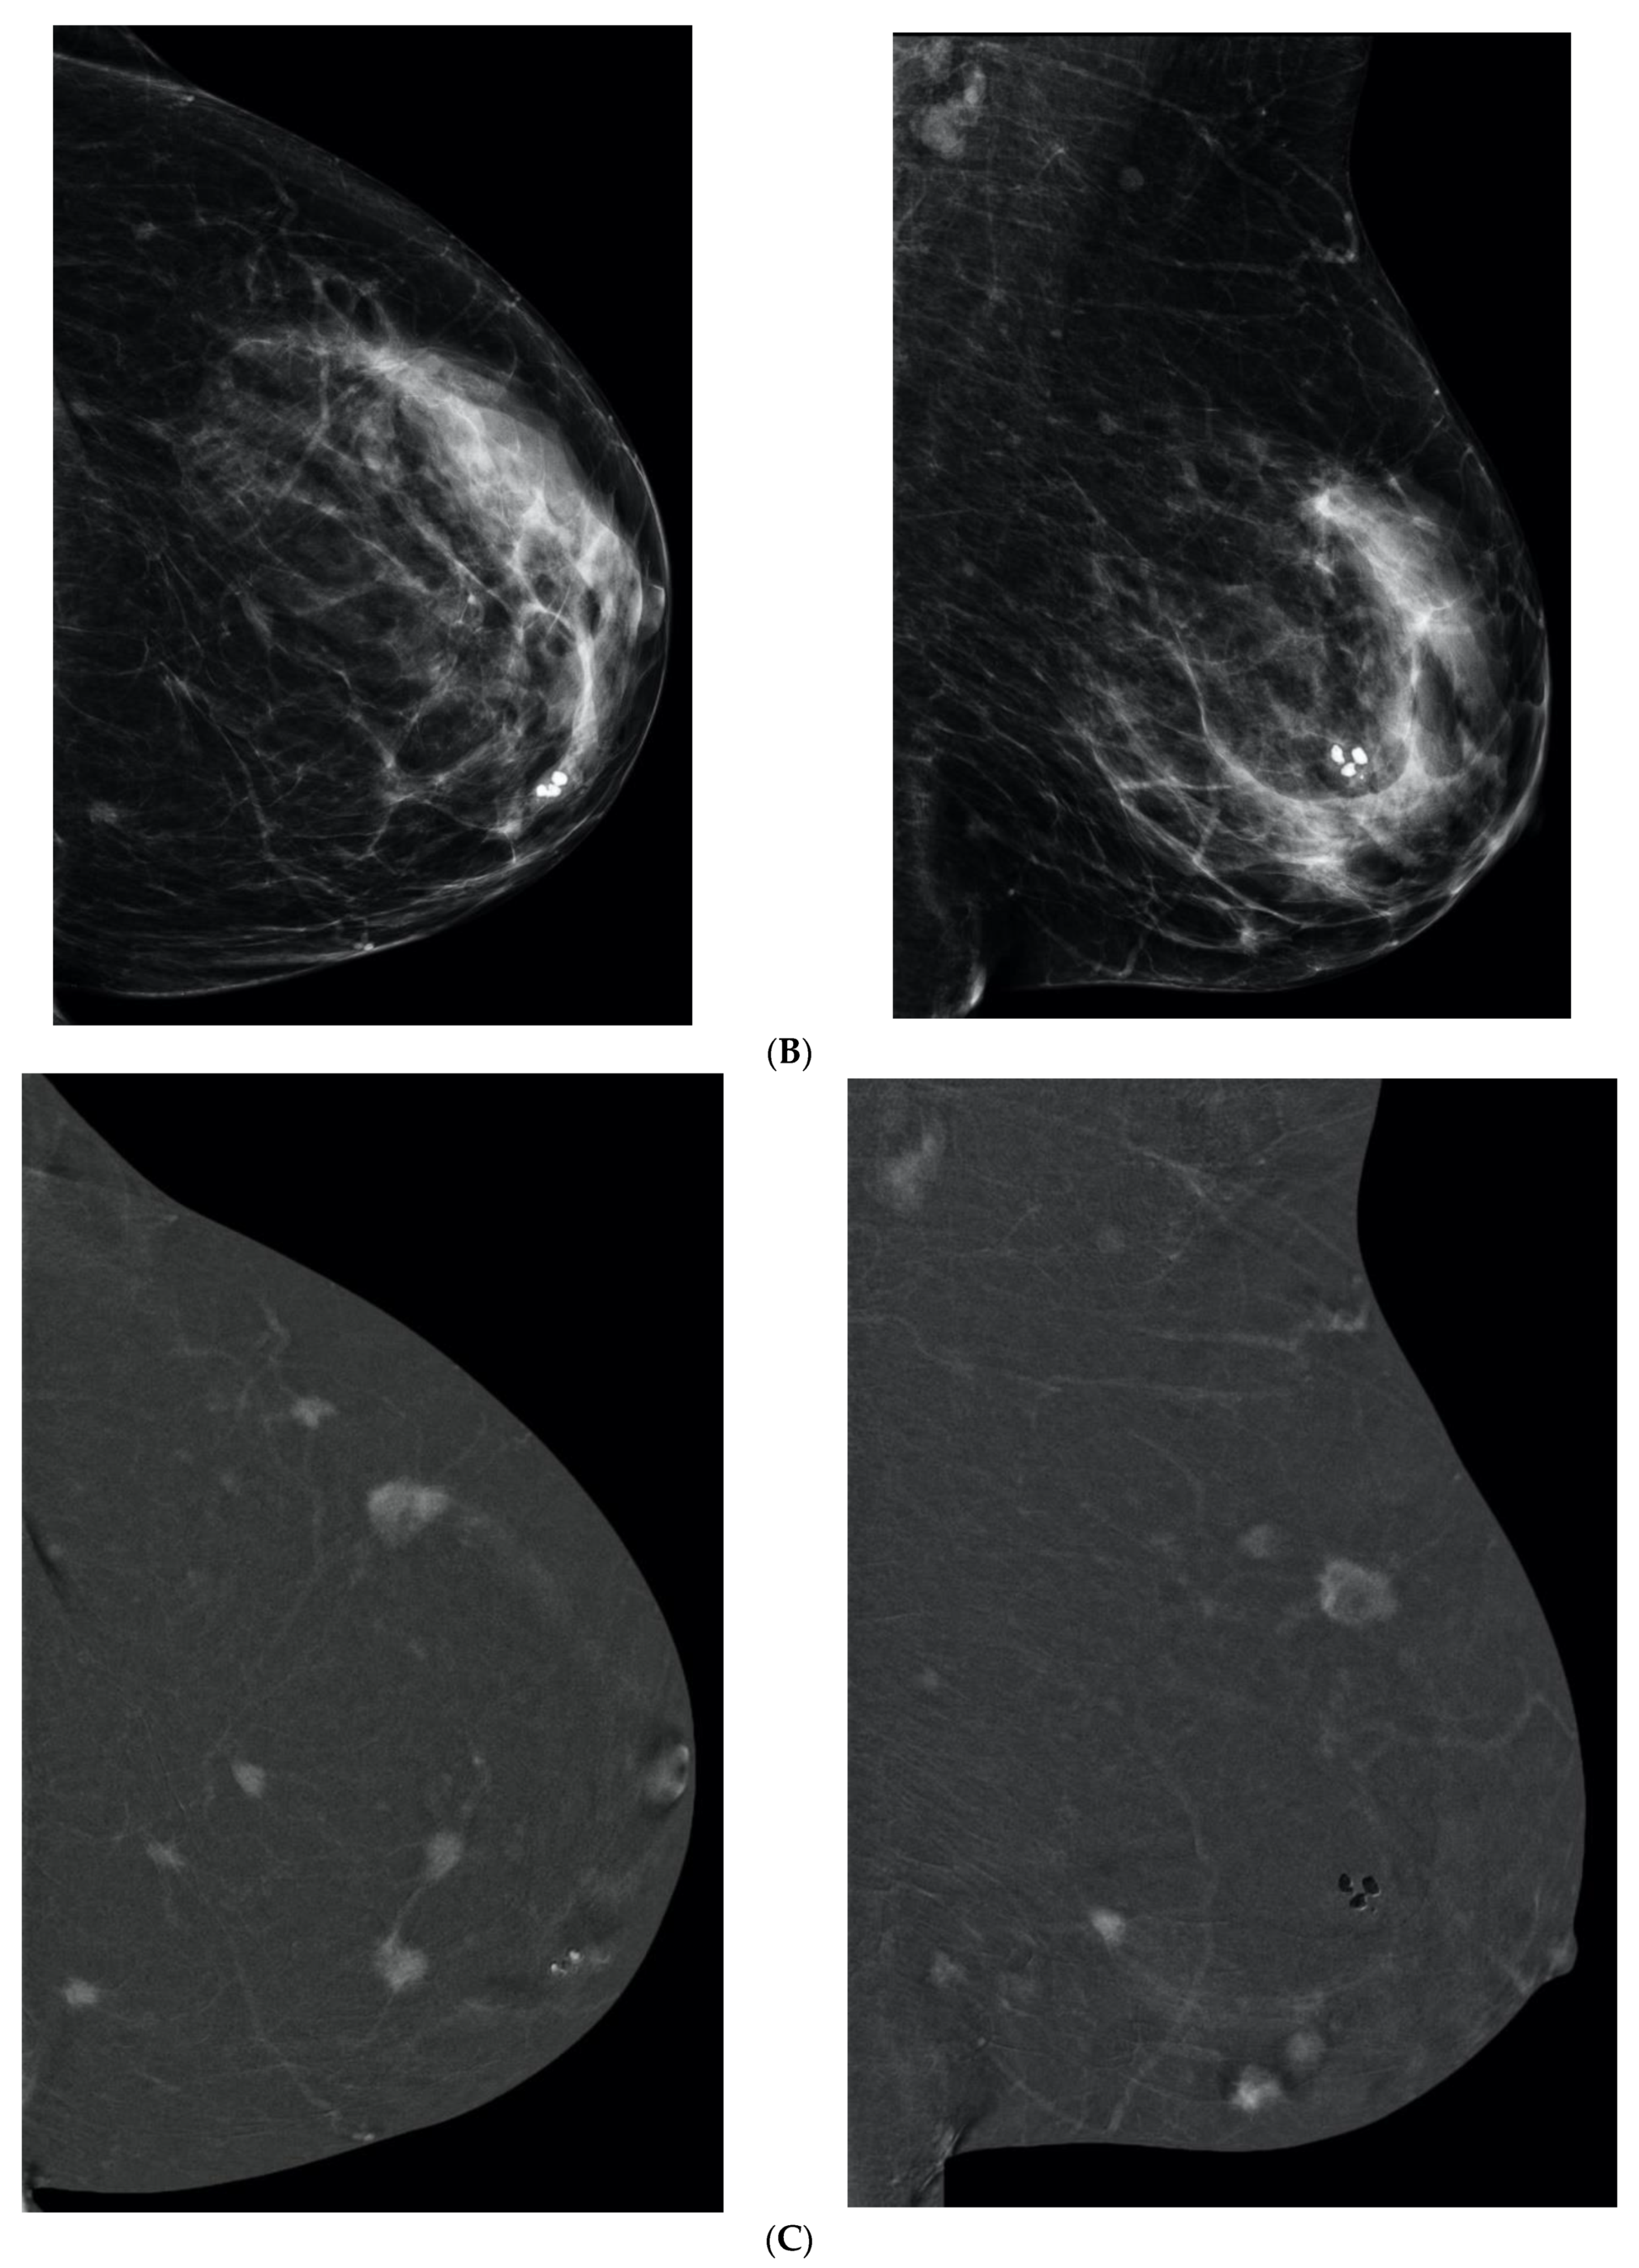 a, b Mammogram of 63-year-old woman. The LCC (left cranialcaudal